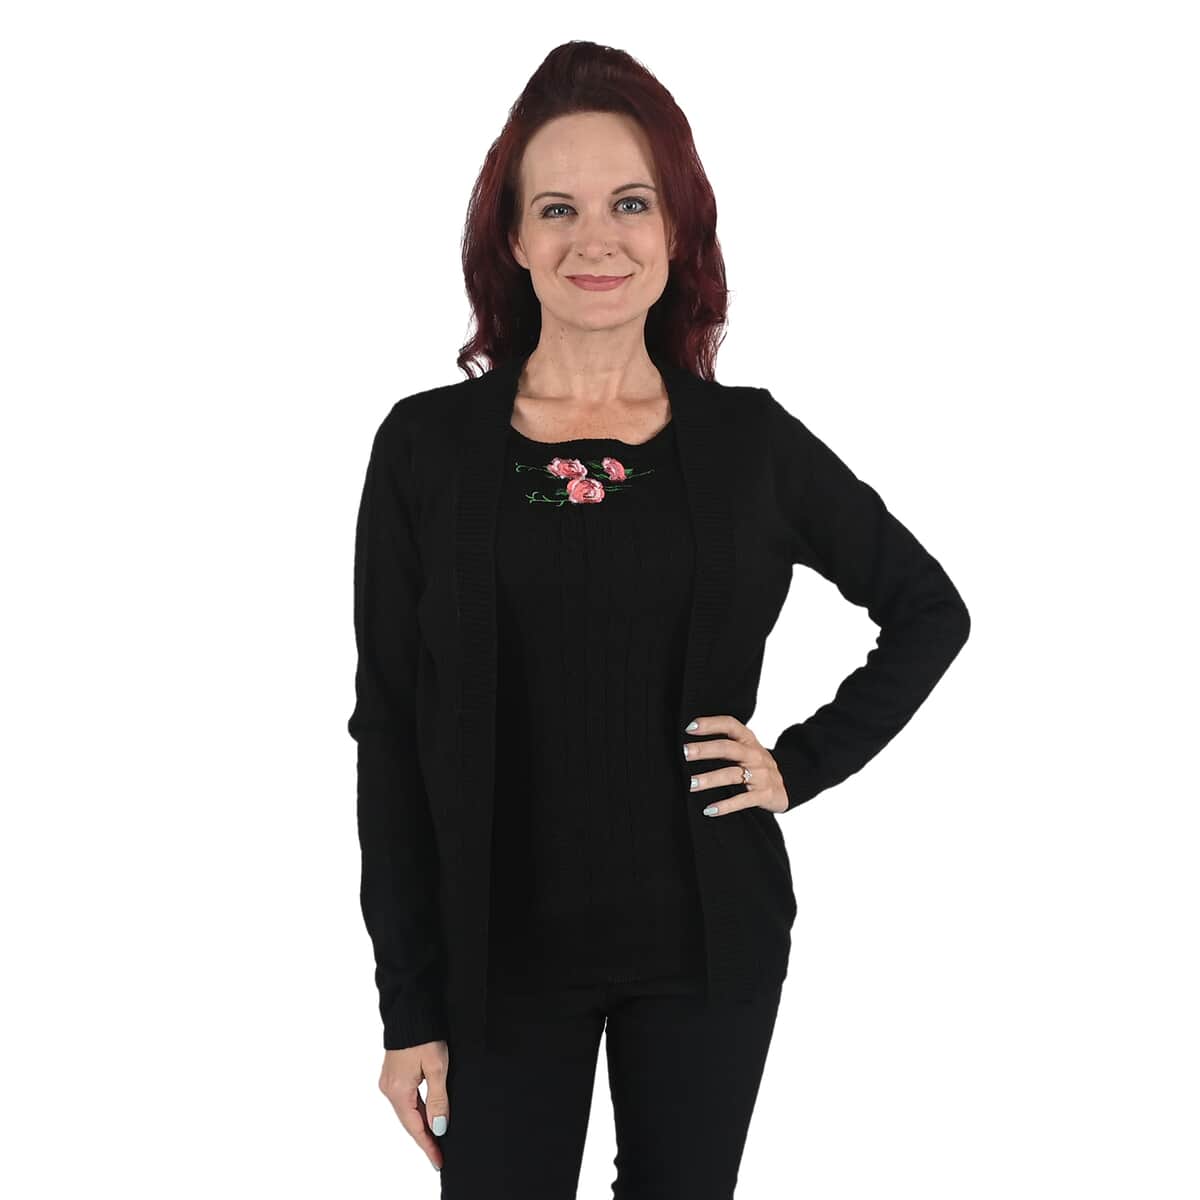 NY DESIGNER SWEATER CLOSEOUT - EVELYN TAYLOR Mock 2-in-1 Twin Set Sweater in Black - Size L image number 0